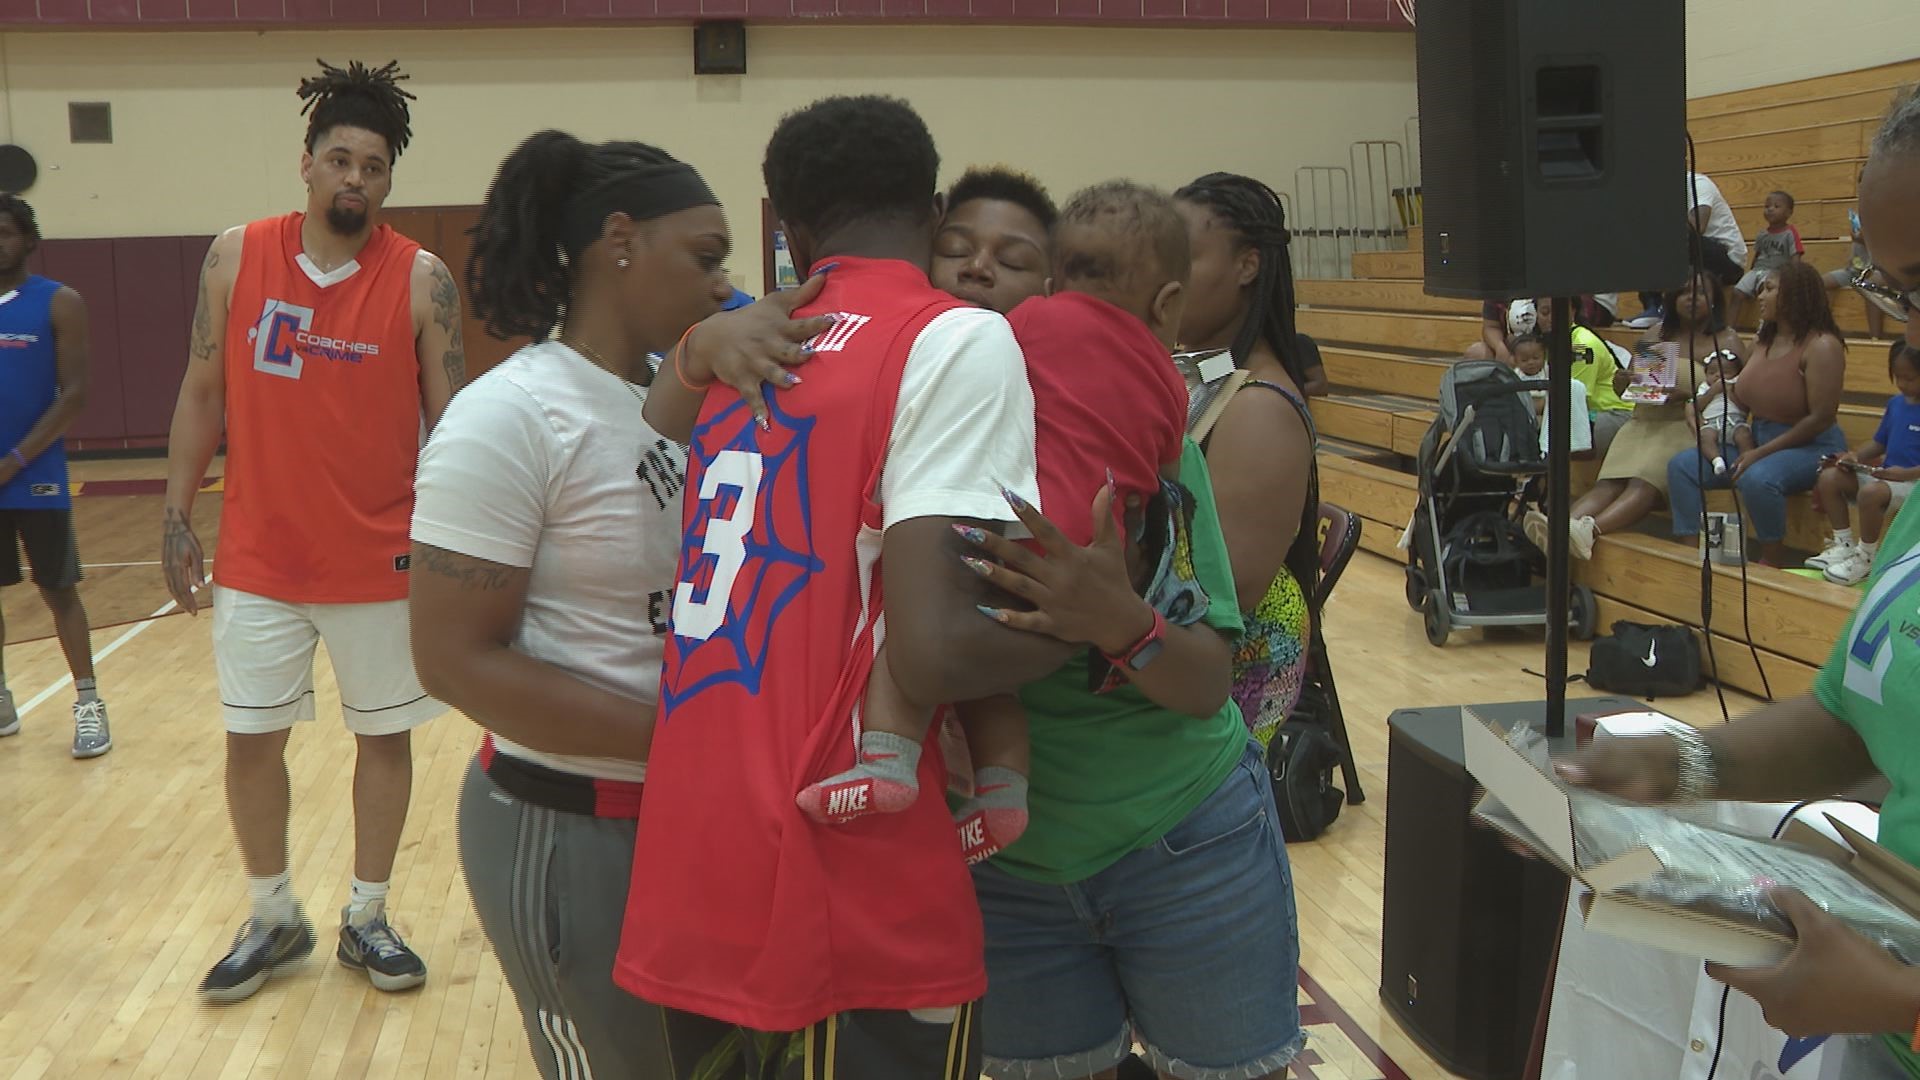 Hundreds gathered at the 2nd Annual Coaches vs. Crime event on Saturday. Organizers passed out free gun locks and paid tribute to slain athletes.